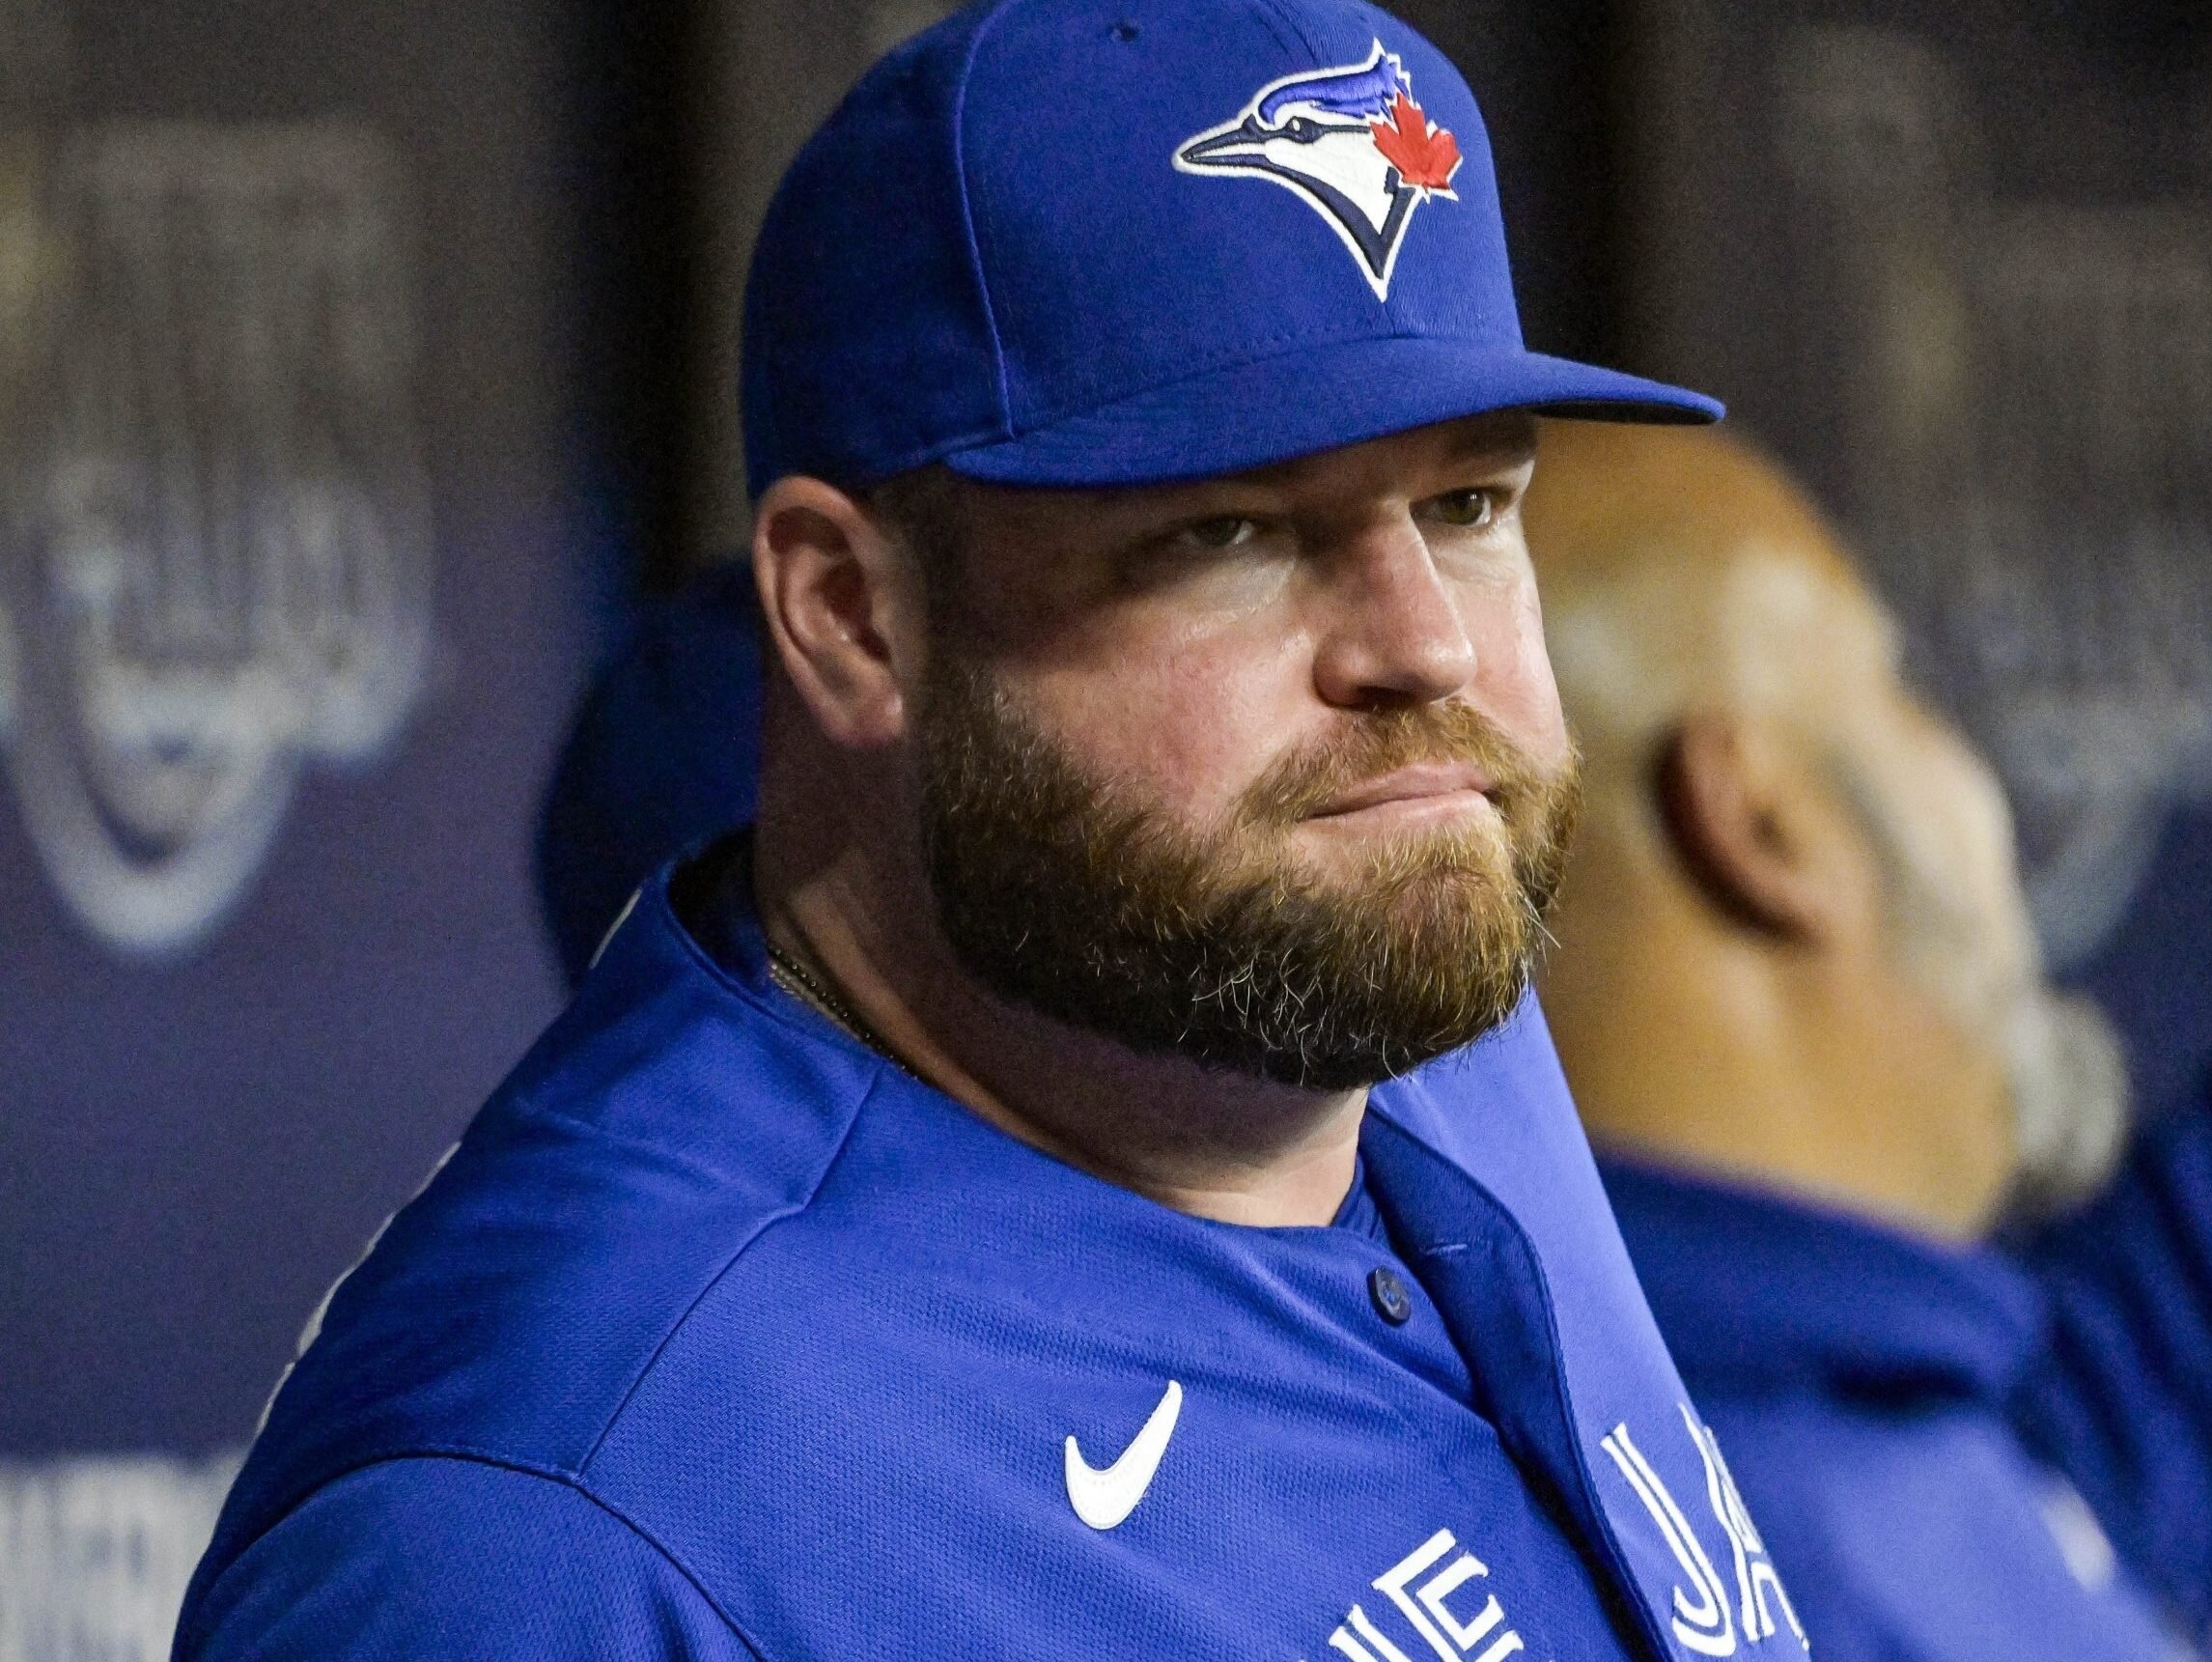 Sad news: Blue jays’ offensive has the worst OPS rating ever toronto blue jays history.